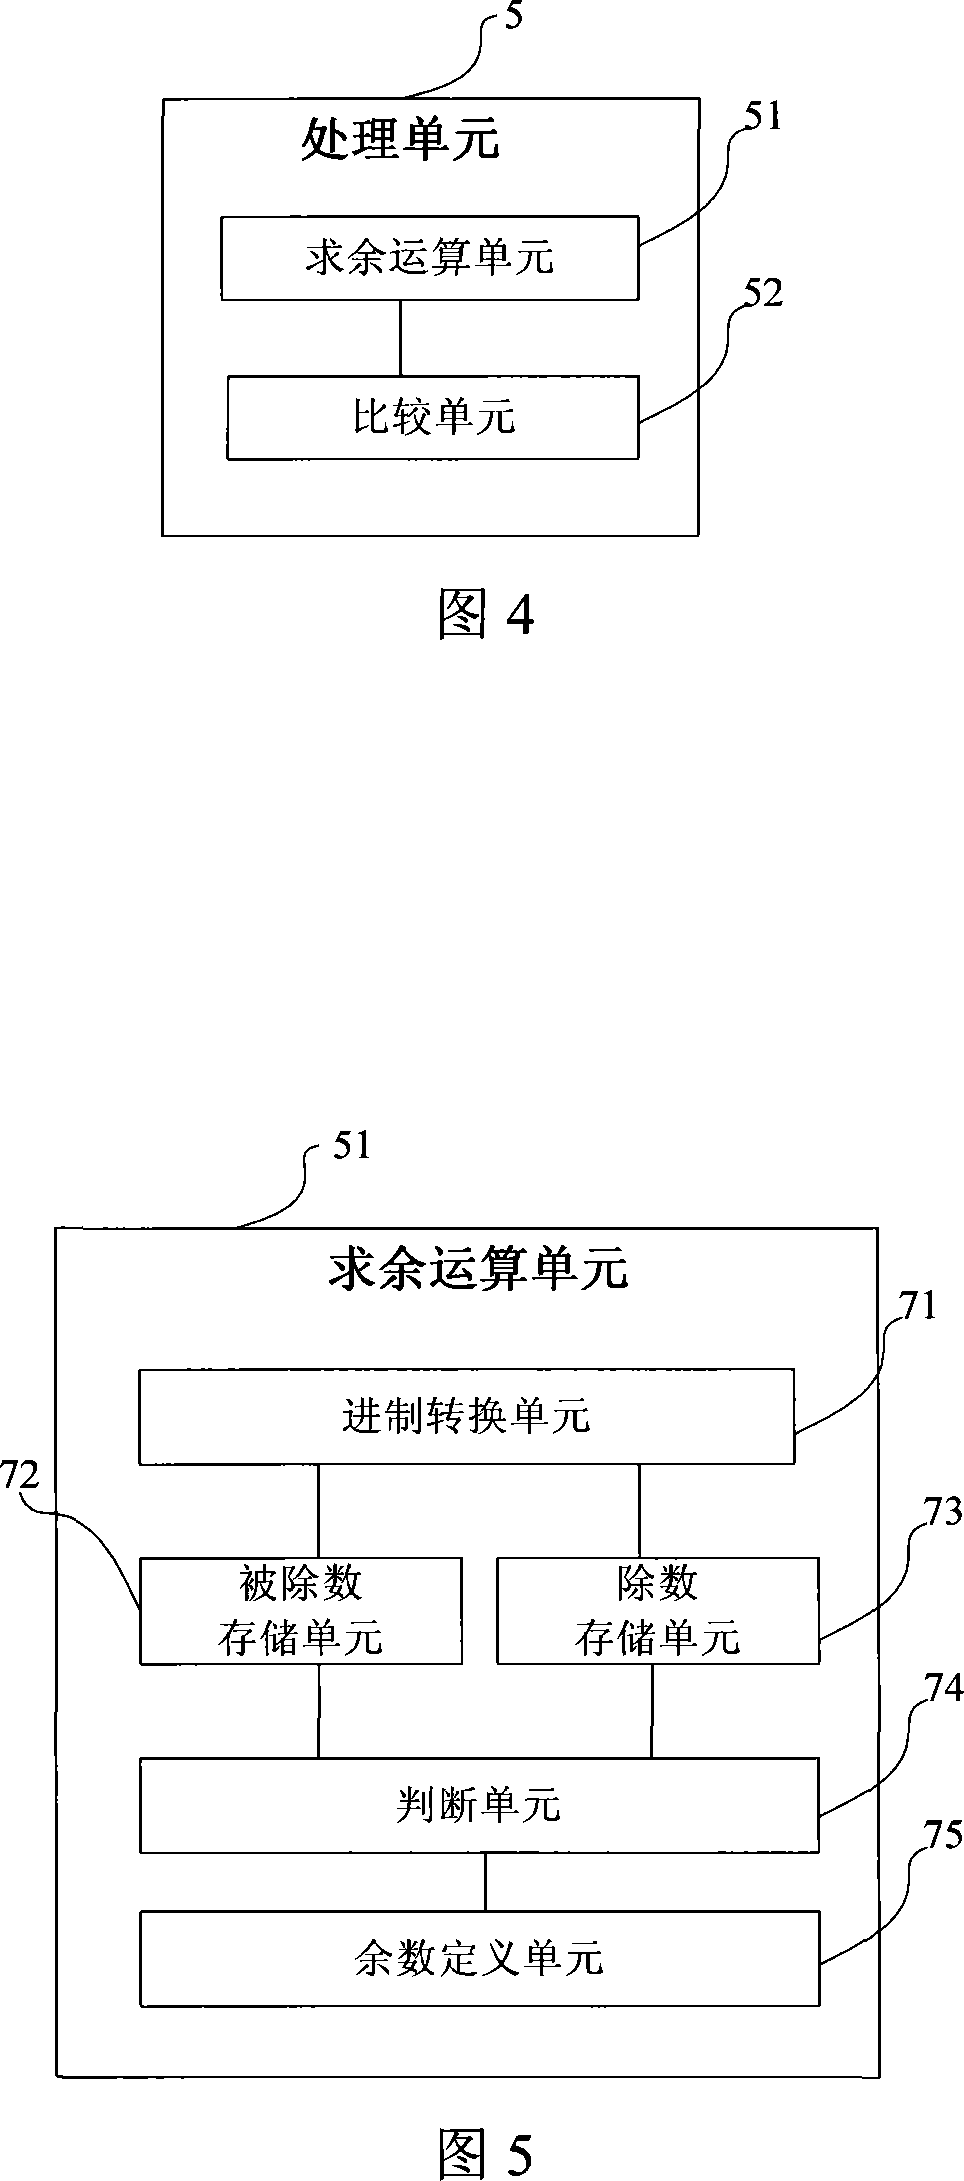 Timing transmission packet method and packet transmission module